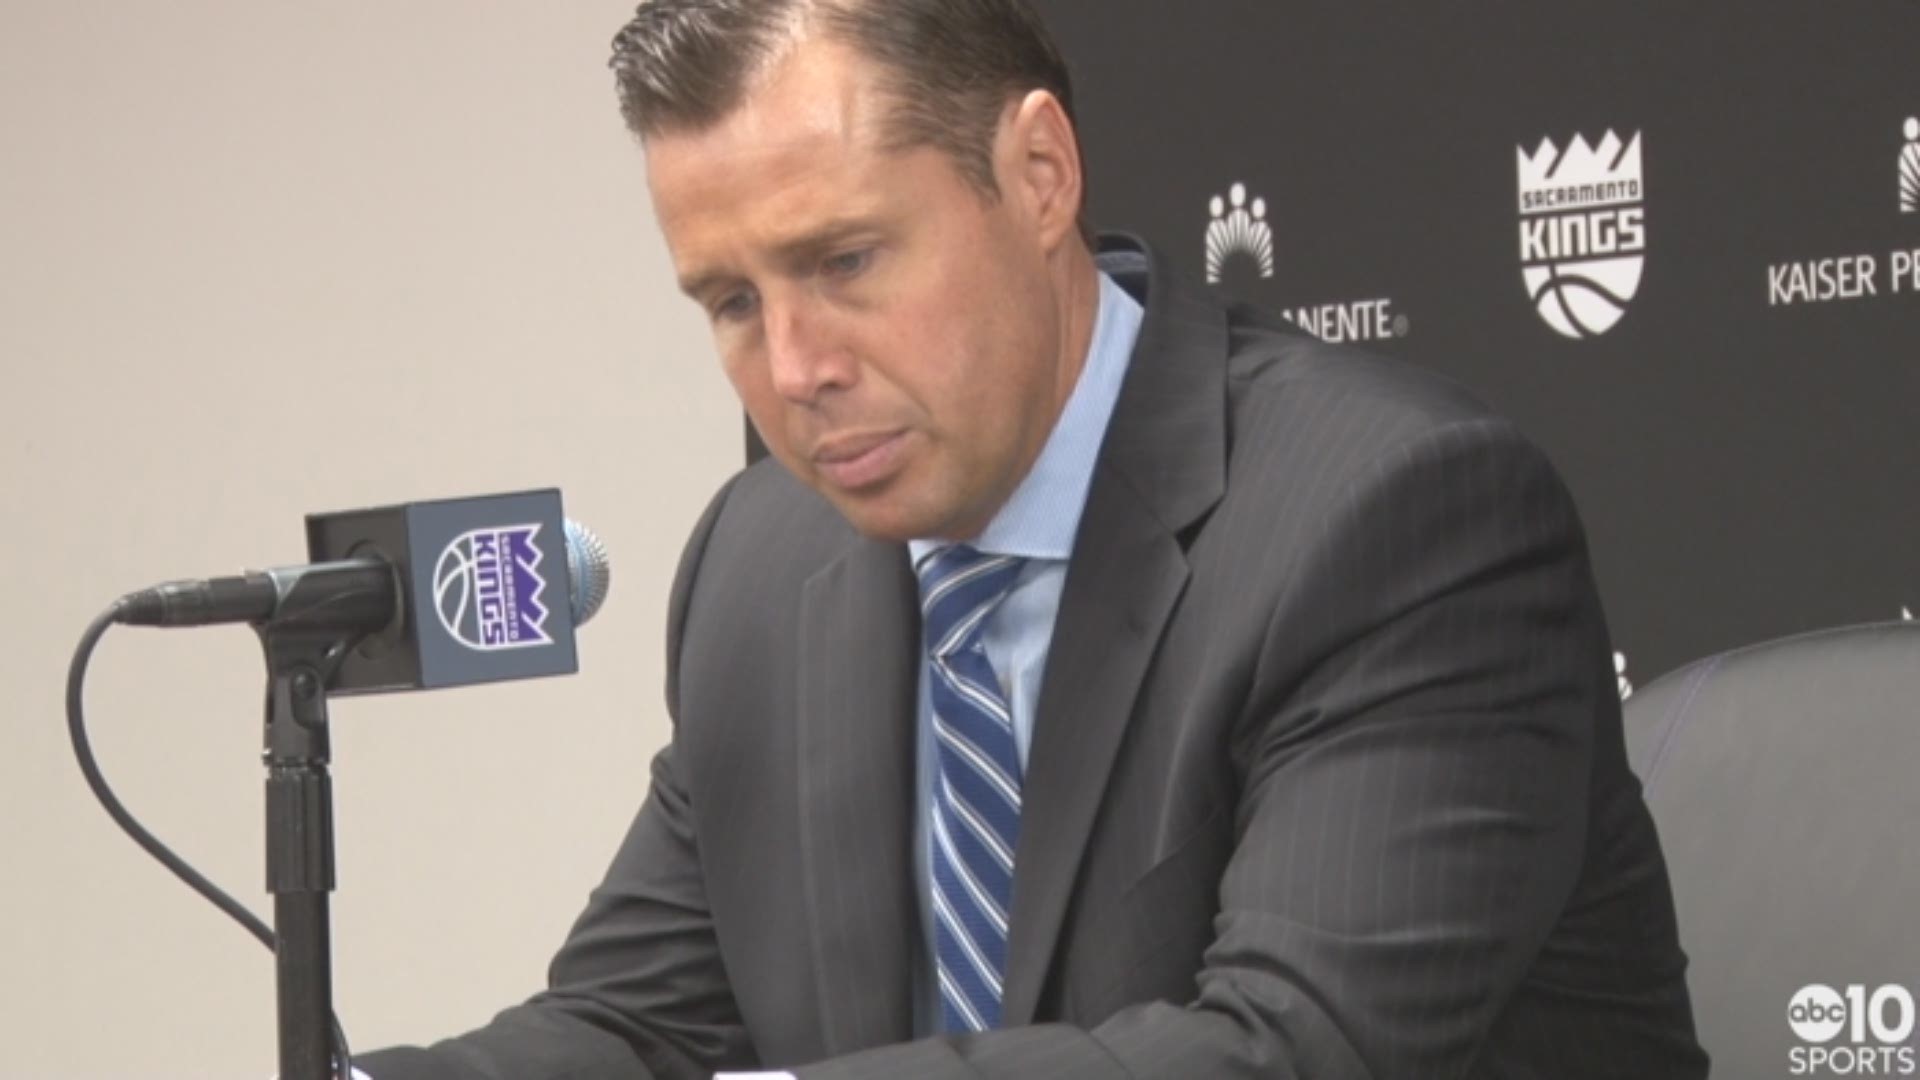 Kings coach Dave Joerger talks about Sunday's beat-down in Sacramento to the Washington Wizards and expecting more from his players.